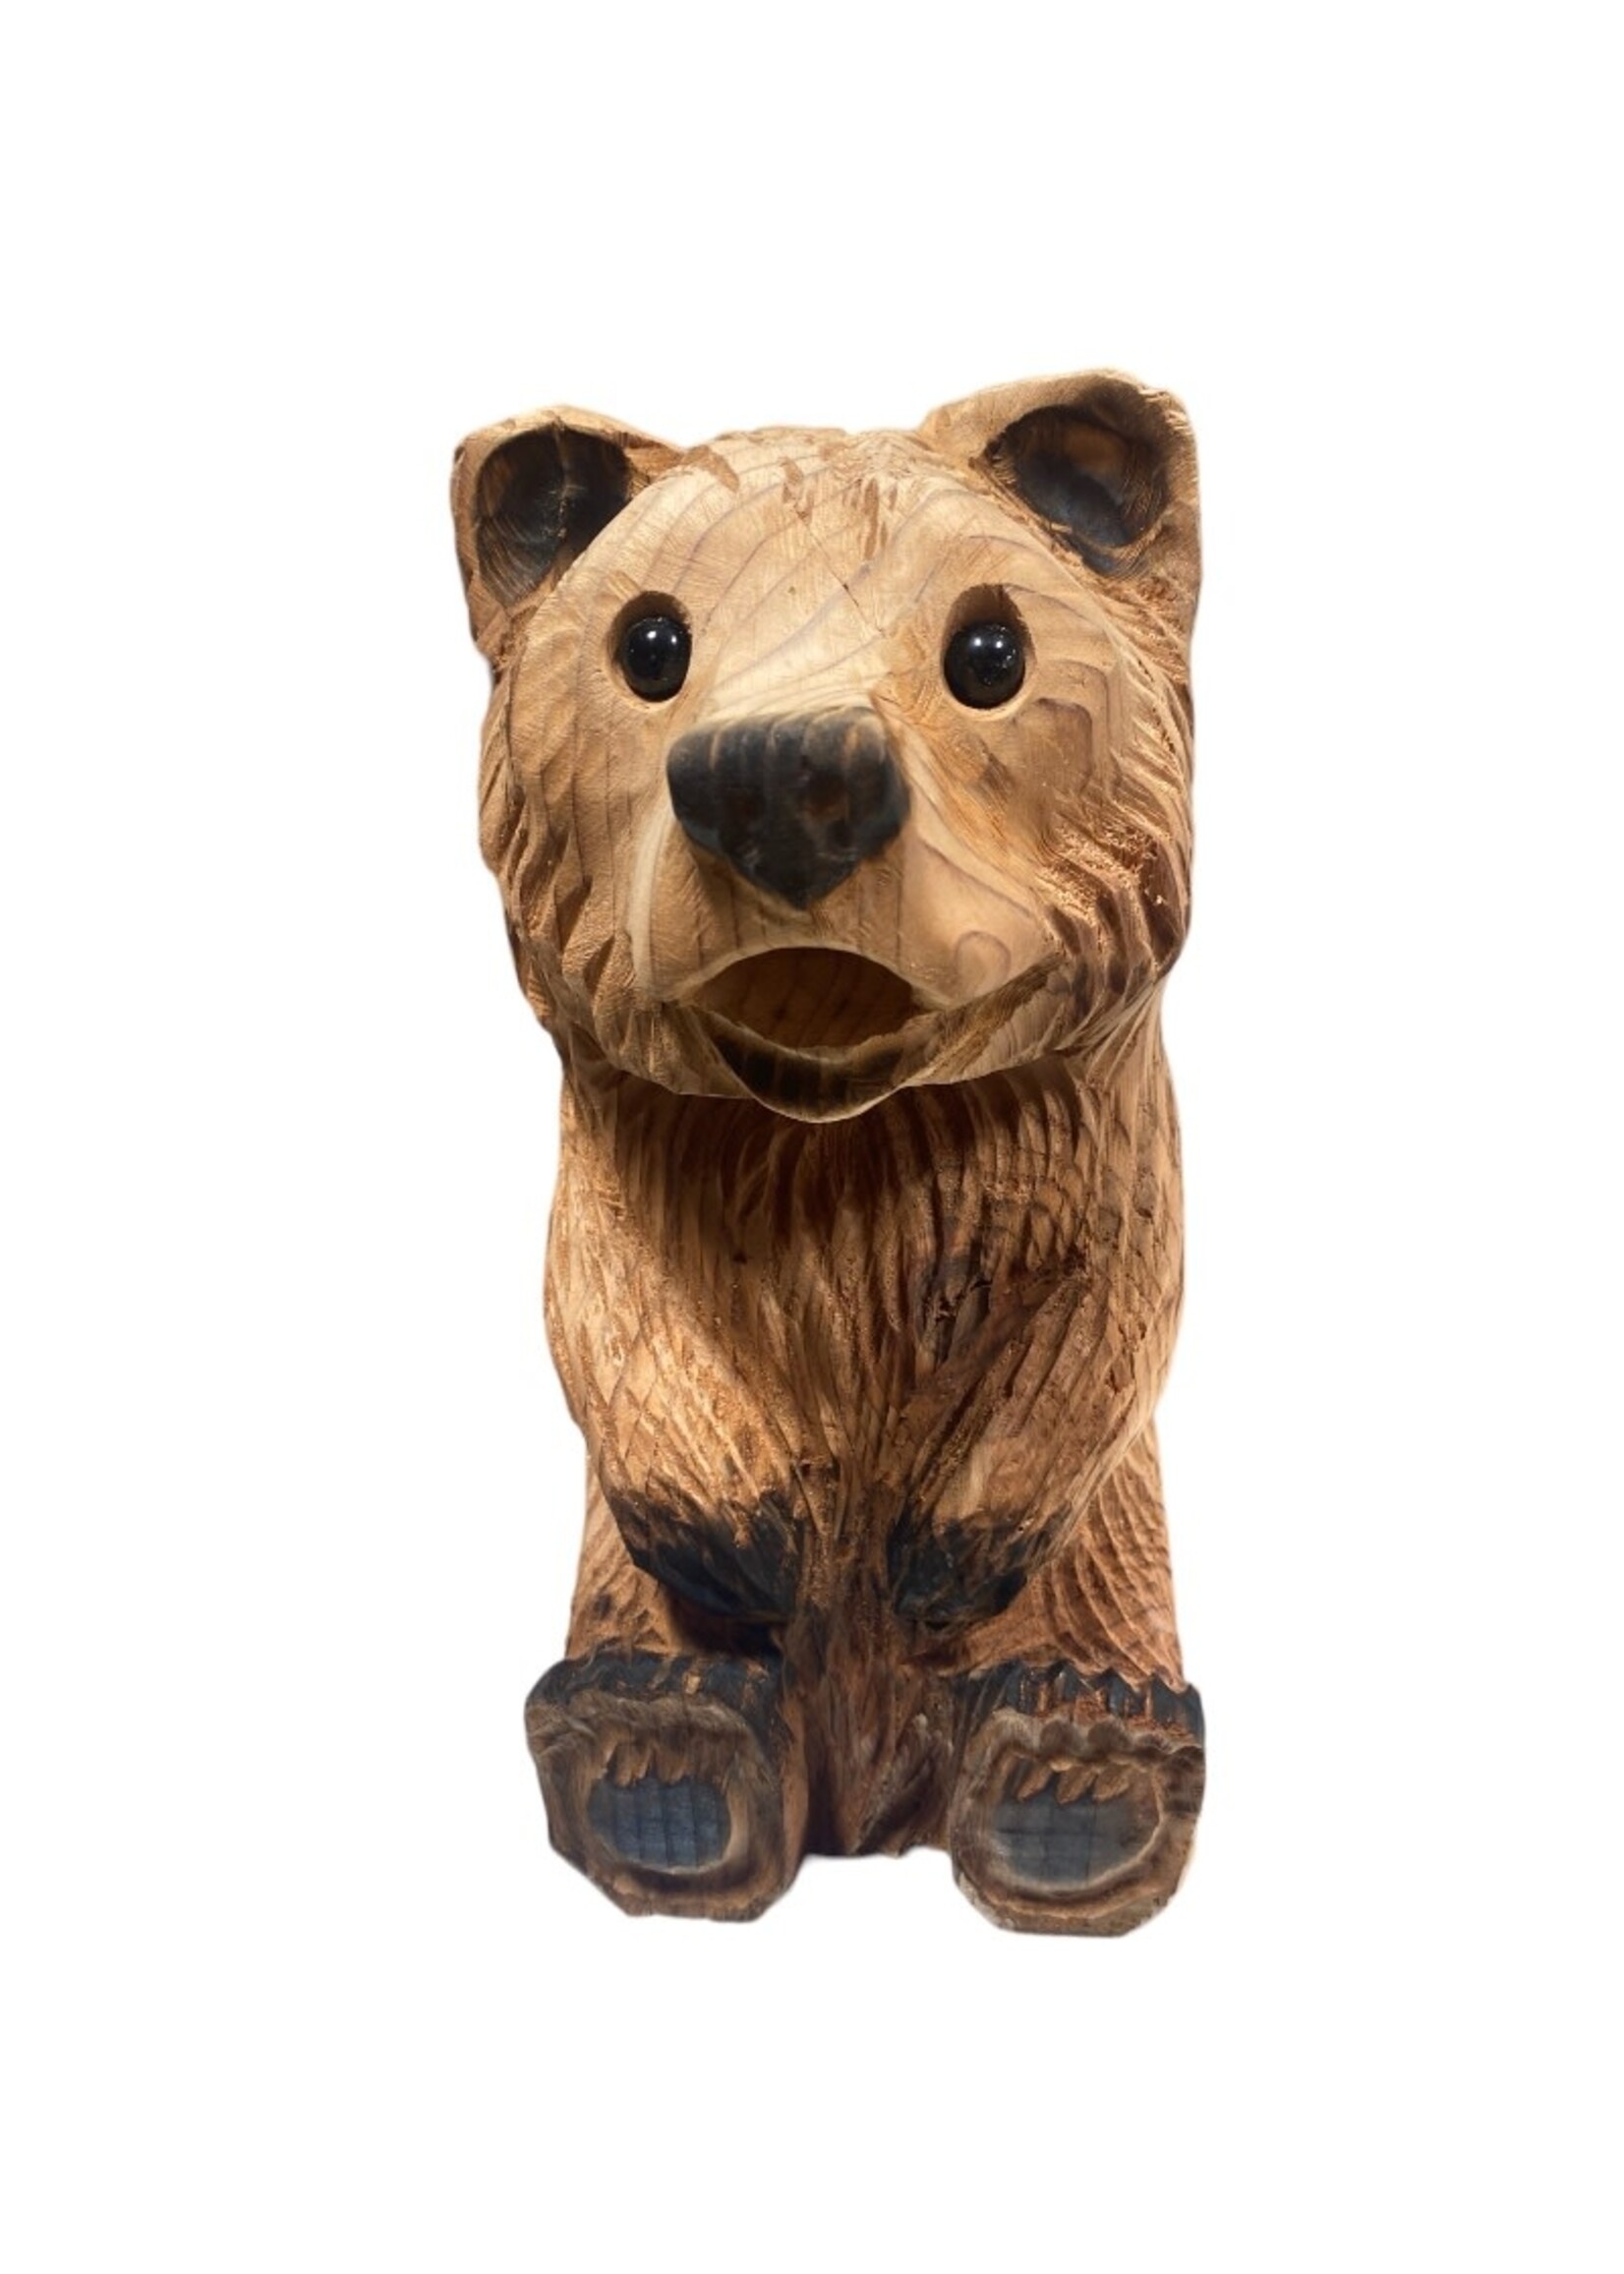 Made in Humboldt Redwood Sitting Bear